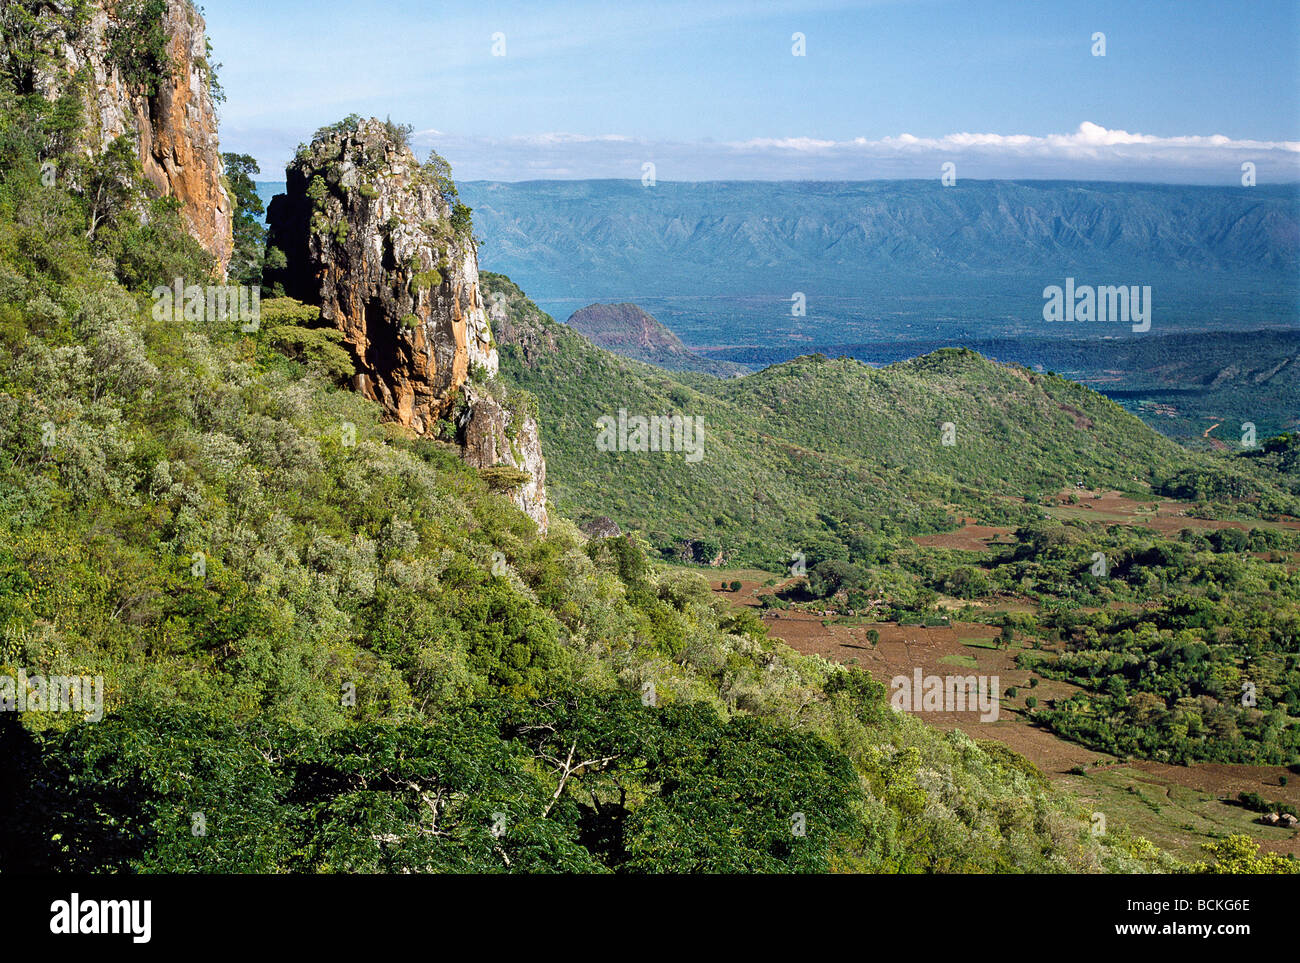 Kenya. A view across the Kerio Valley to the Keiyo Escarpment    a western wall of Africa  s Great Rift Valley. Stock Photo